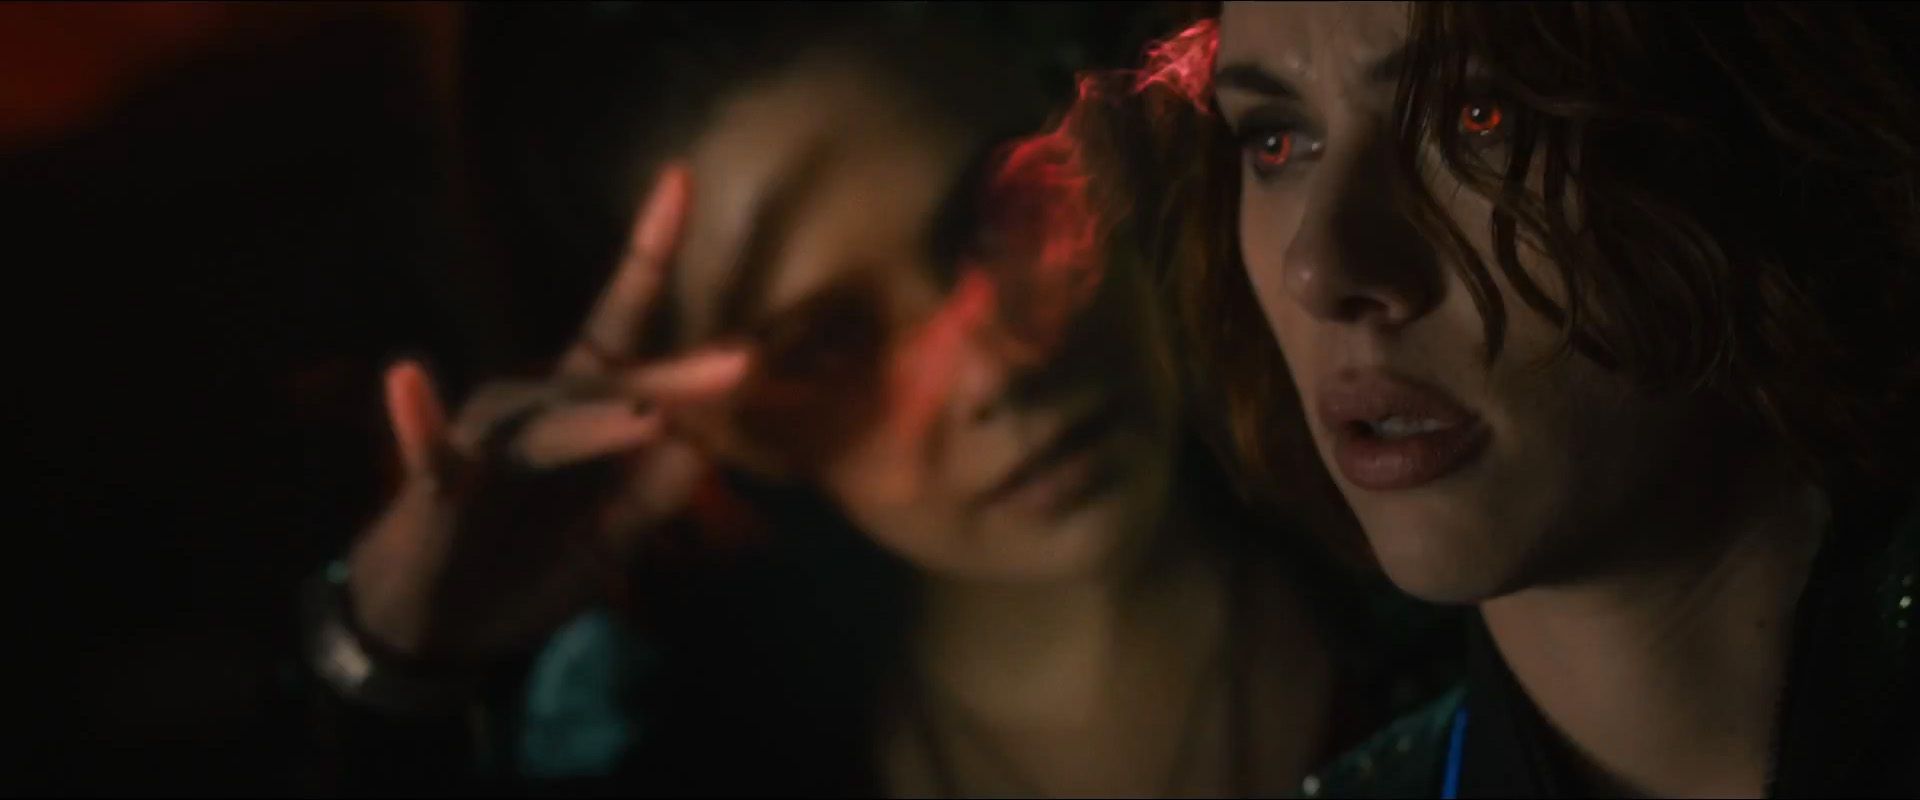 Avengers 2: Age of Ultron Trailer 3 - Scarlet Witch Controls Black Widow